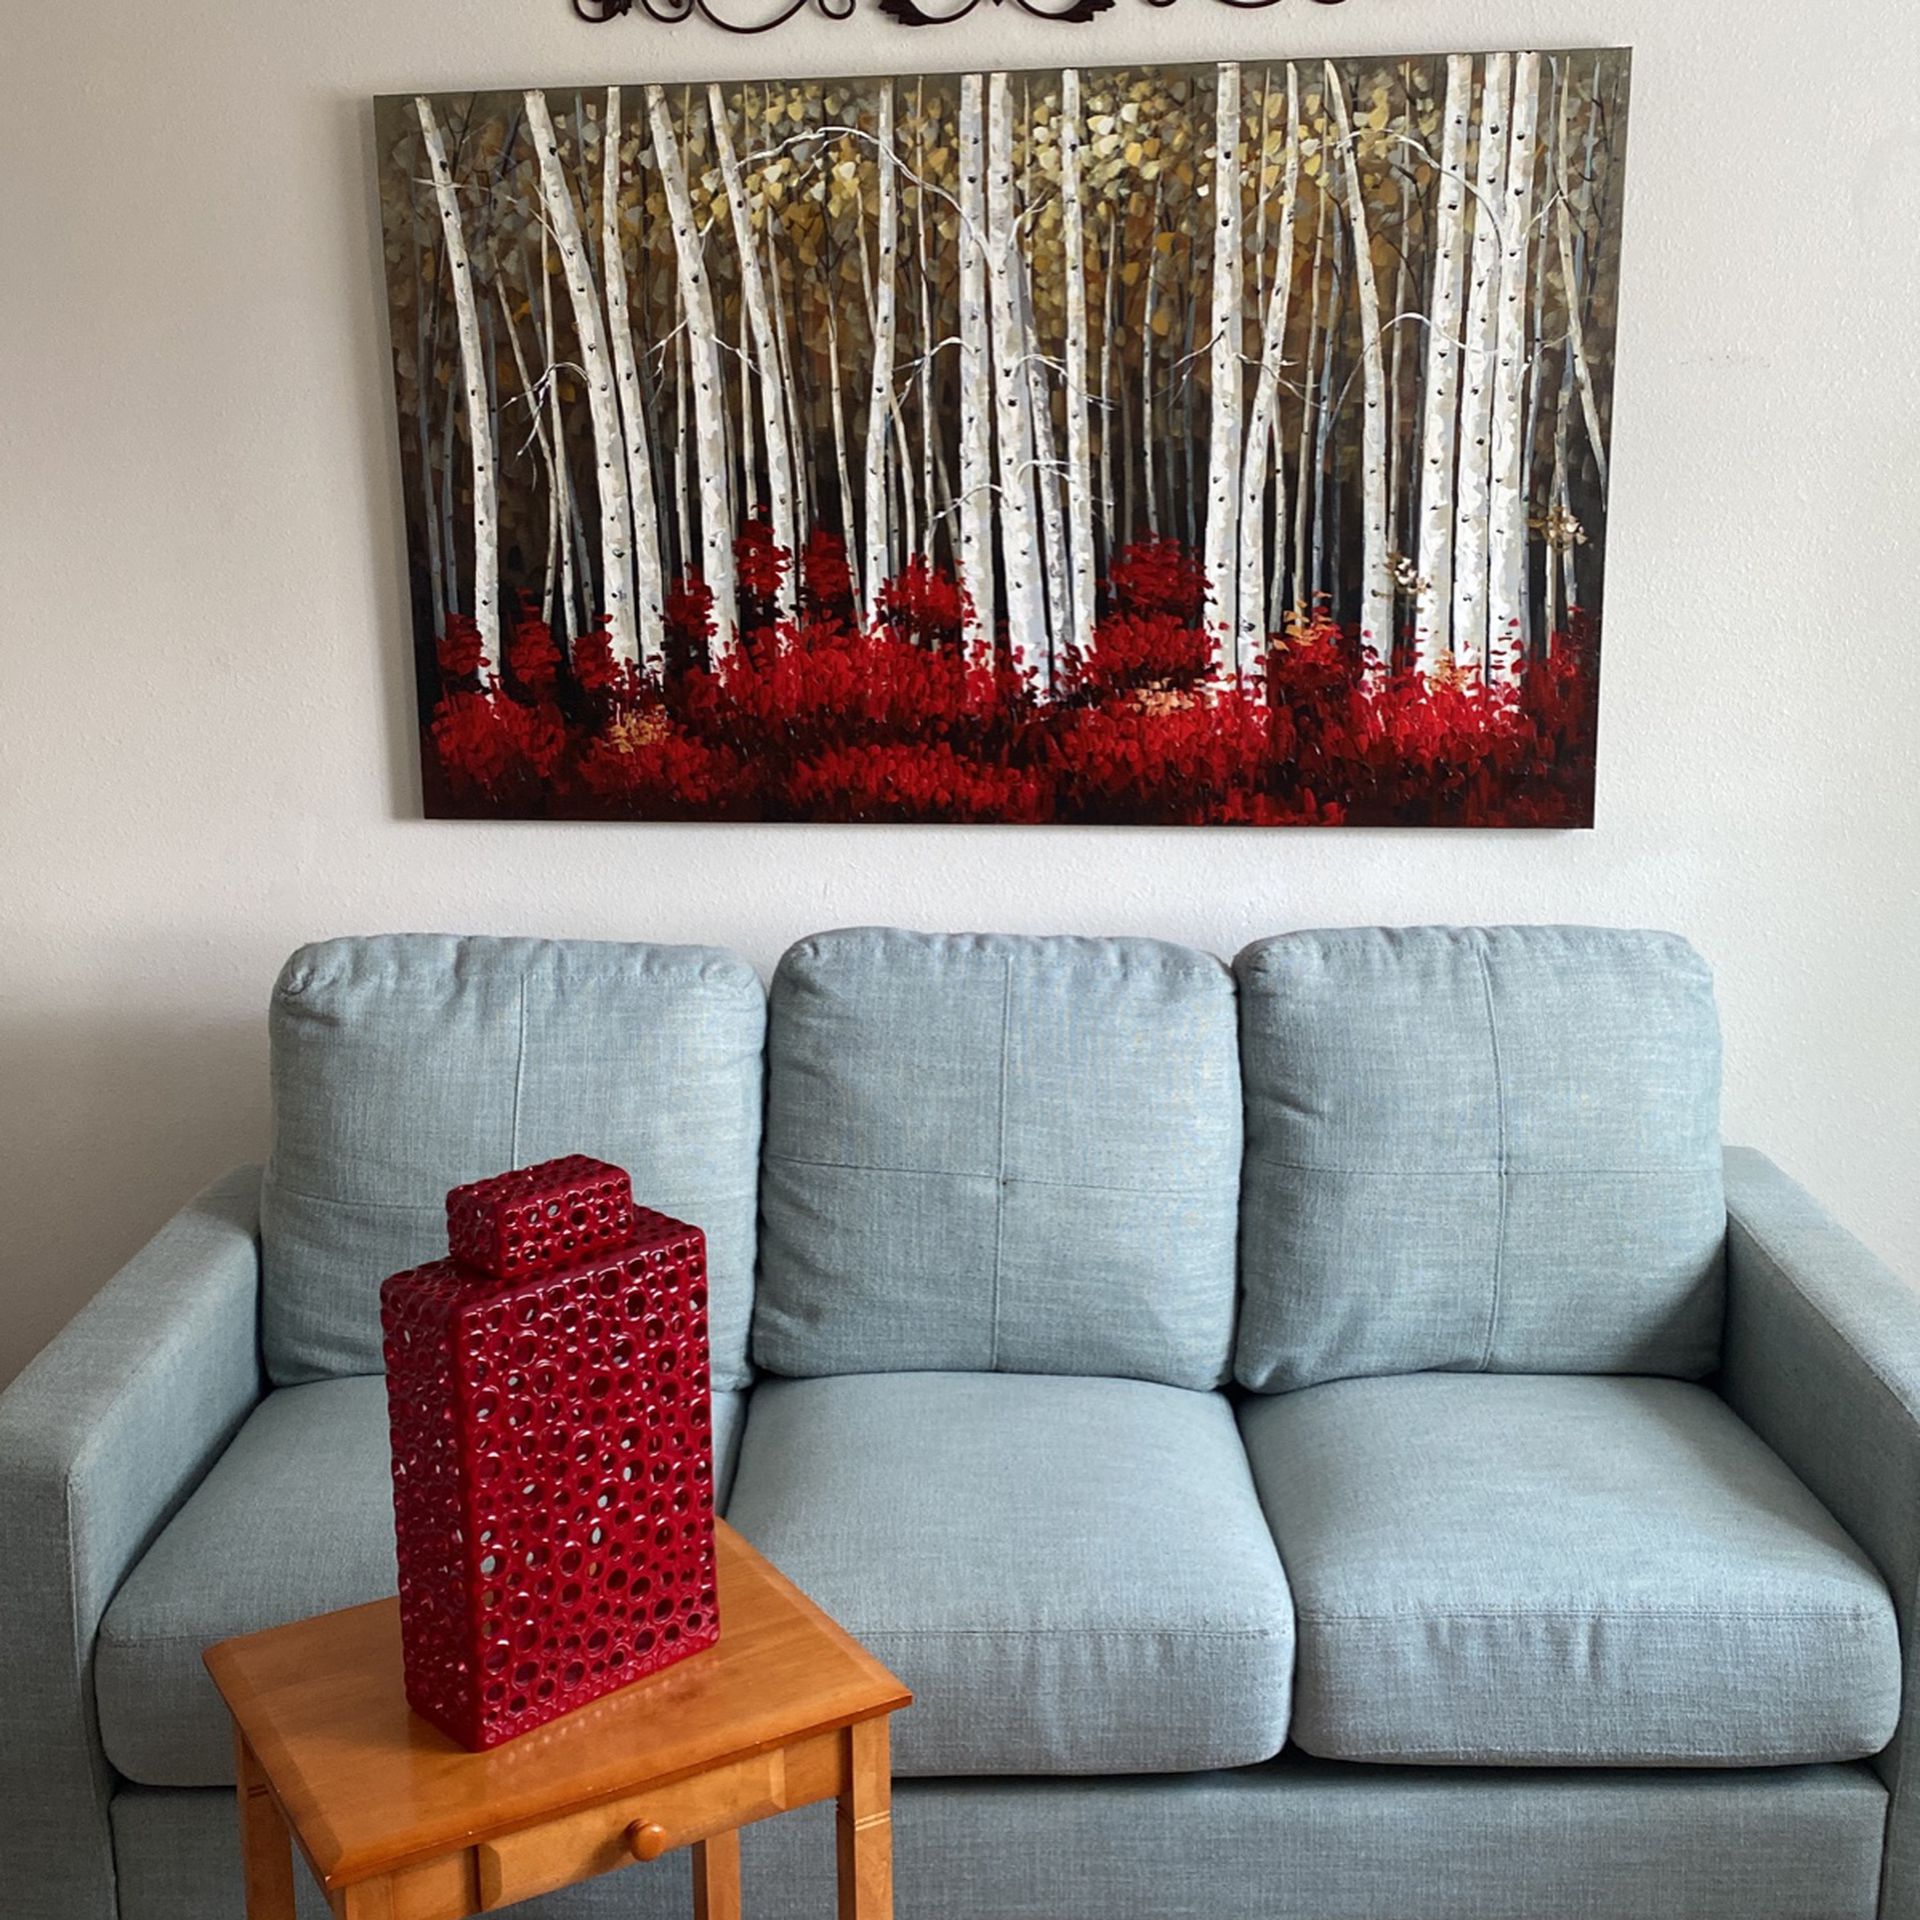 Sofa, Wall Art, and Side Table With Drawer 